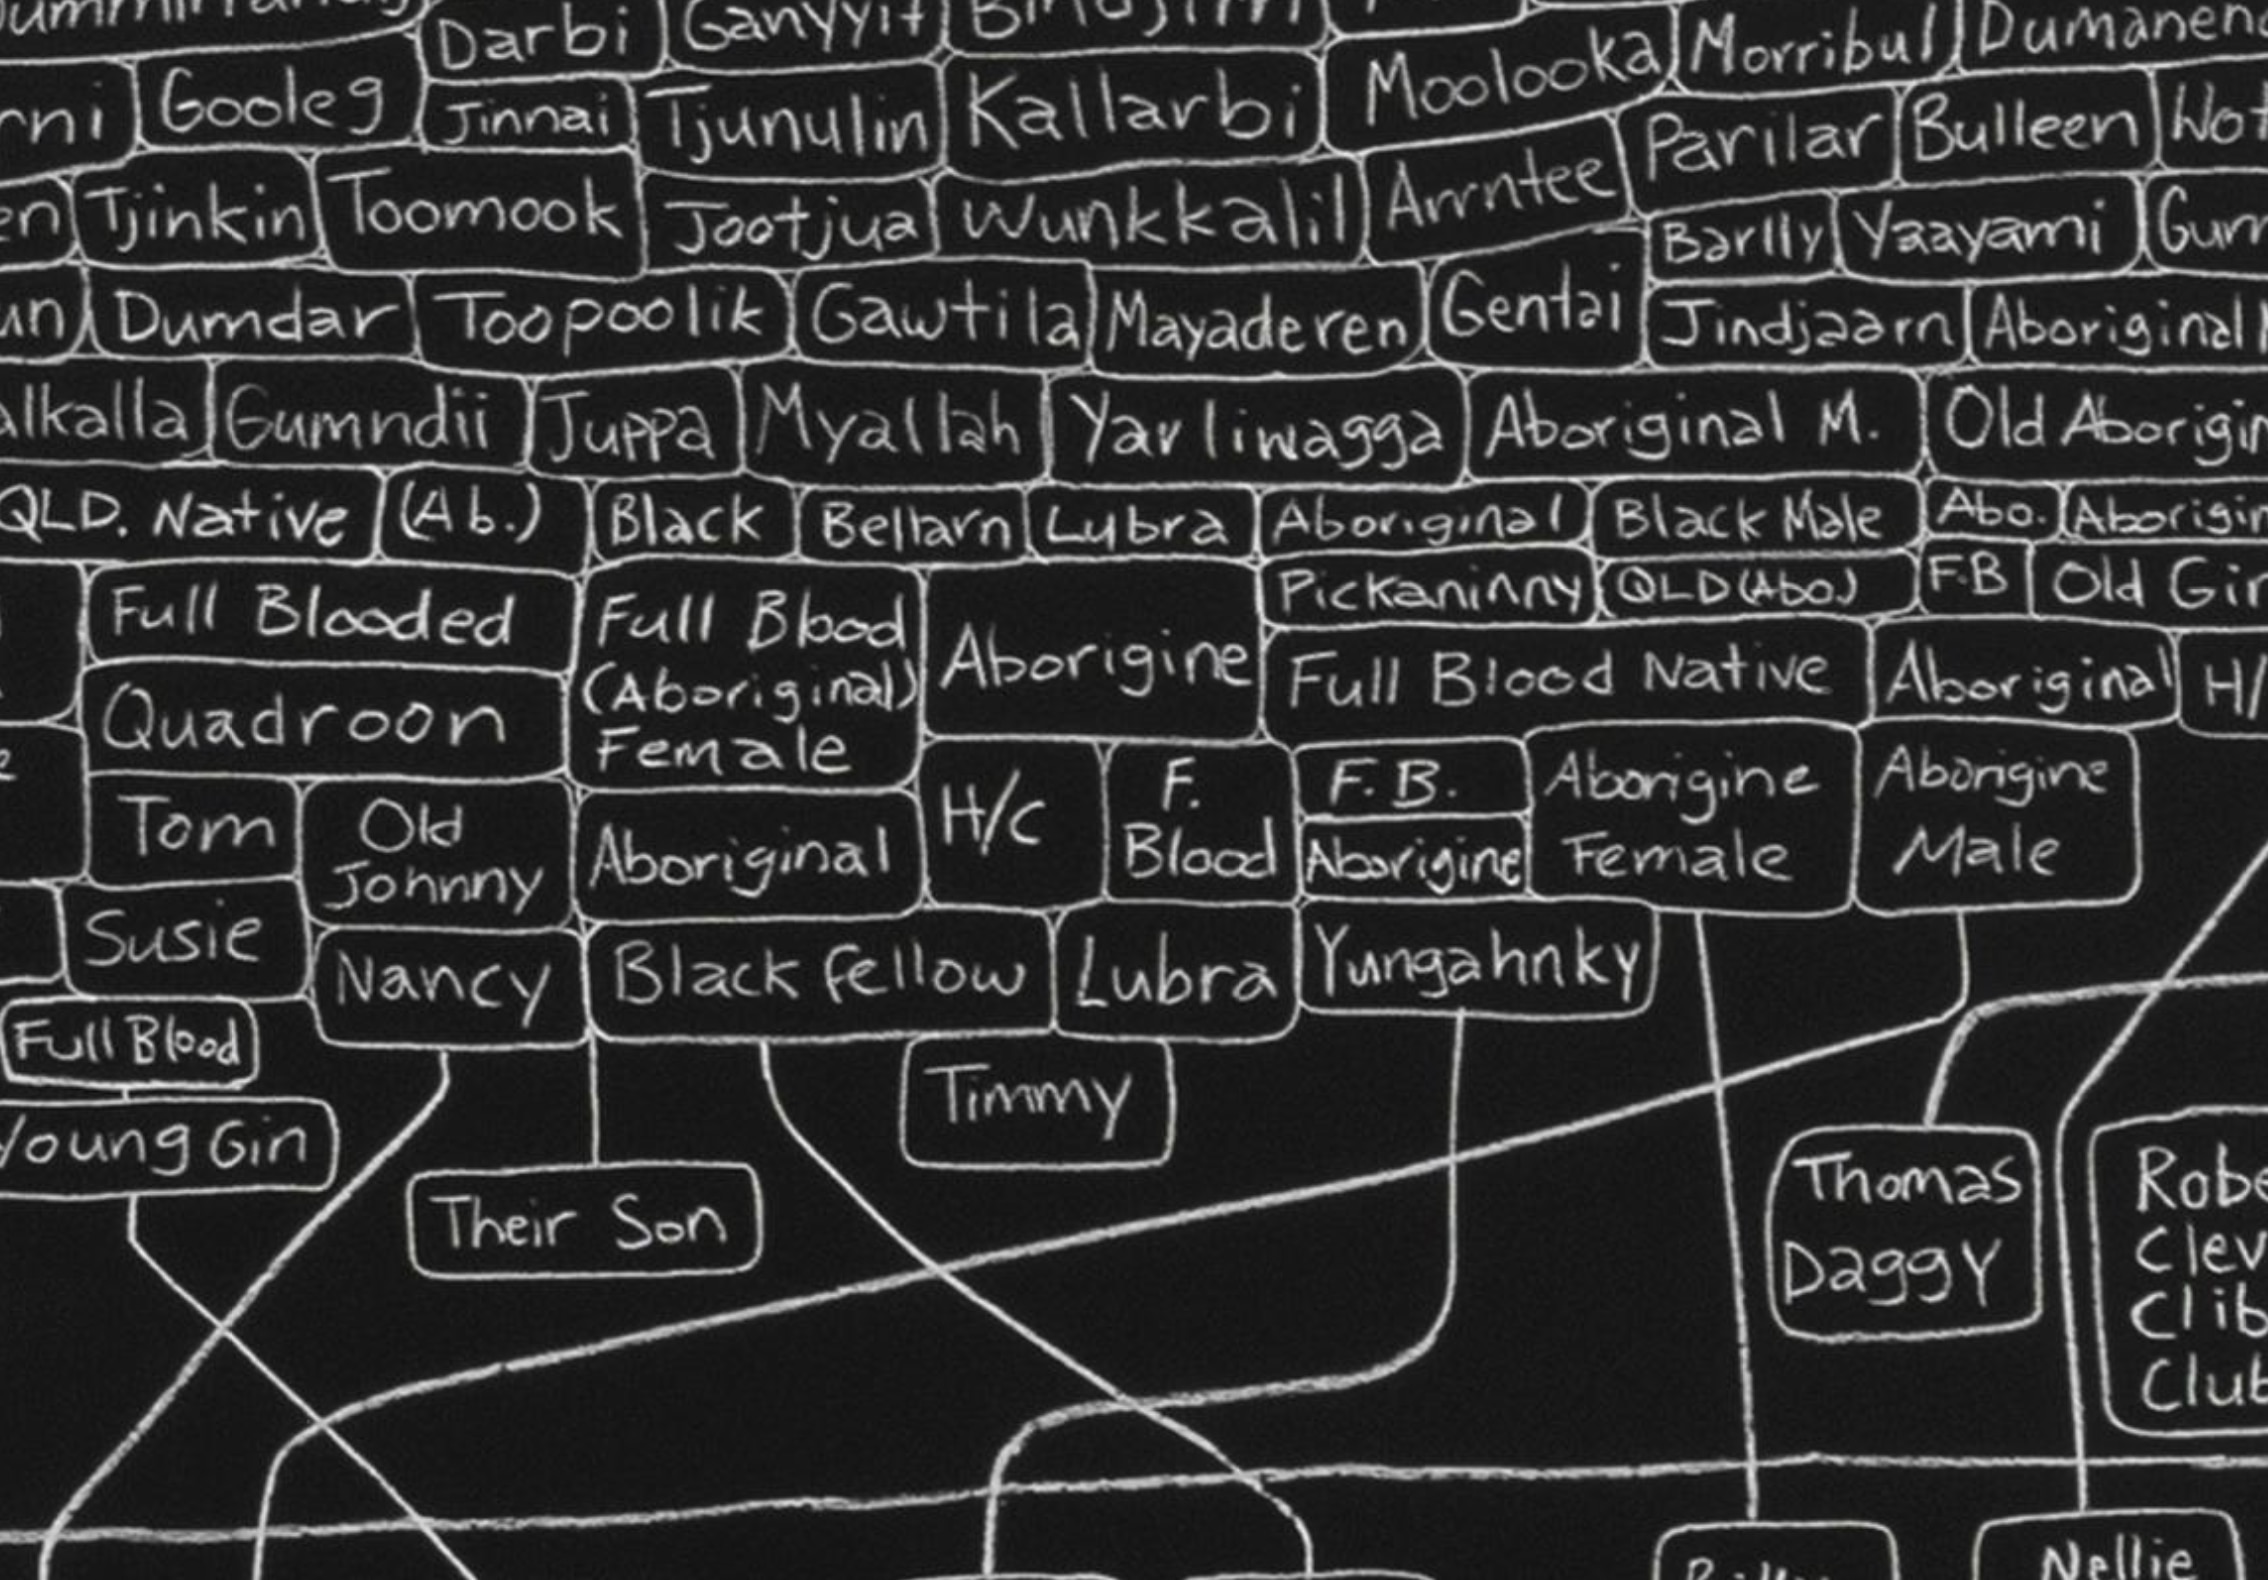 A chart of connected white boxes on a blackboard features a mix of English and Aboriginal names.